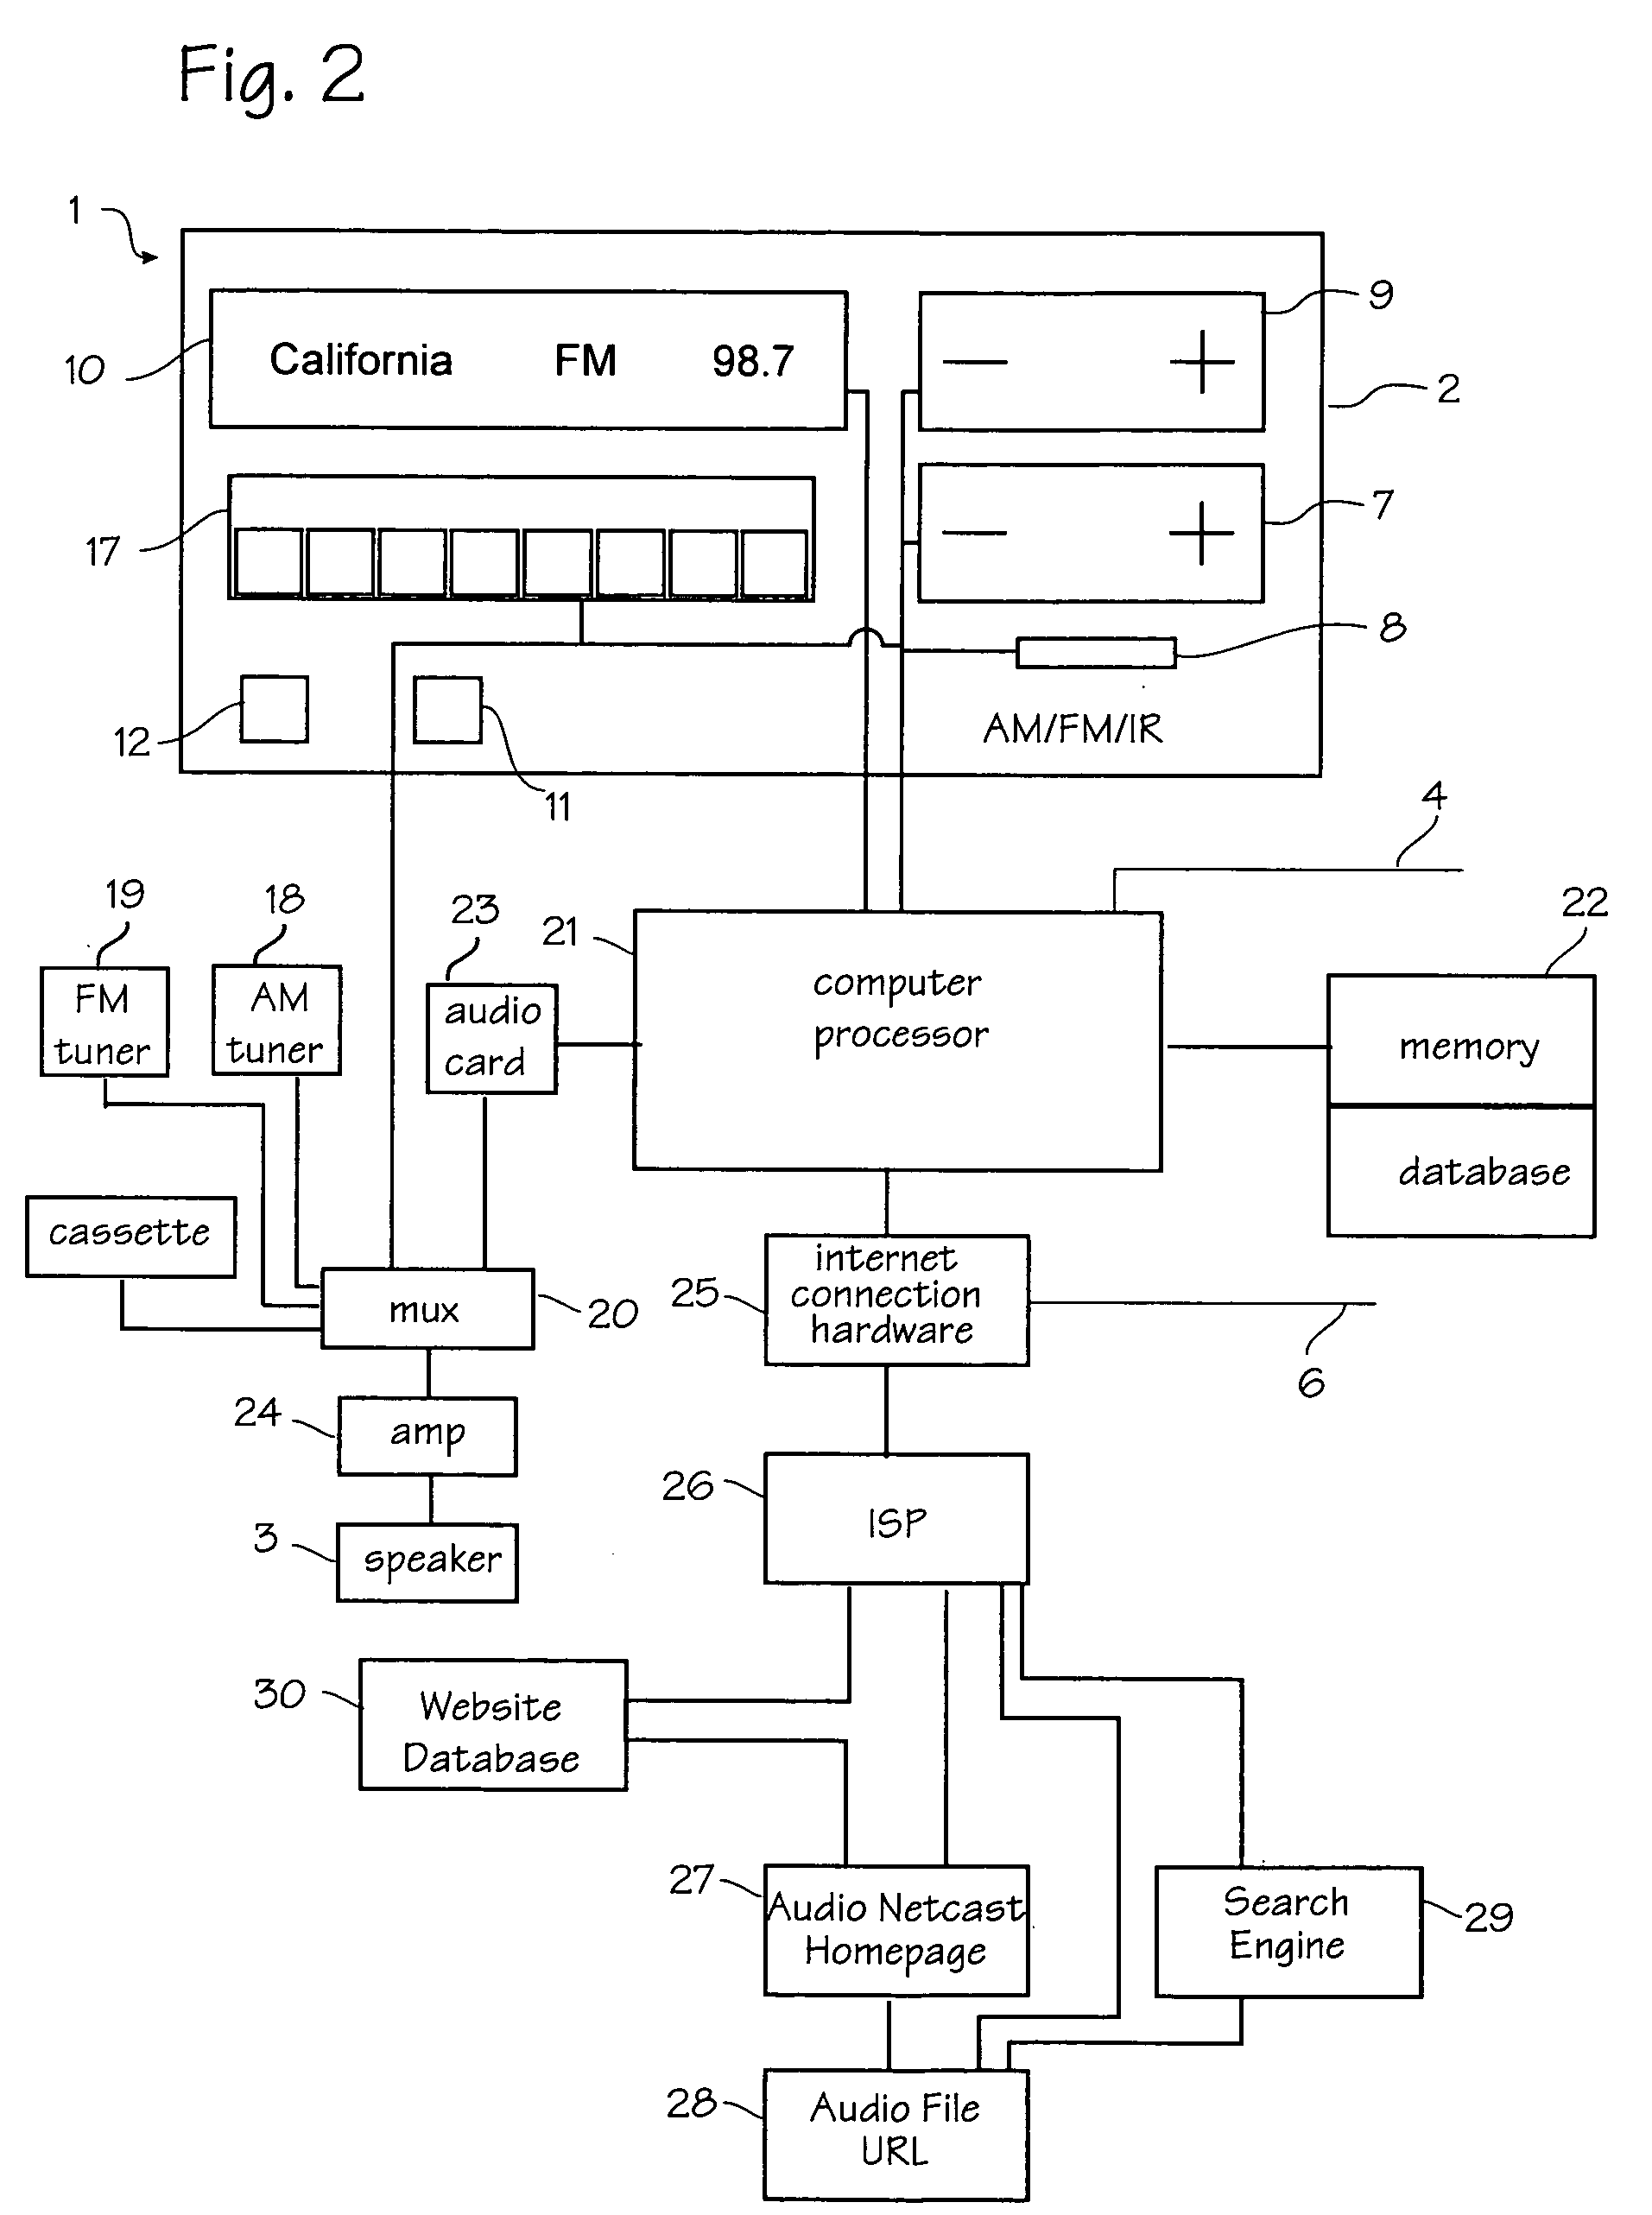 Internet radio receiver with linear tuning interface